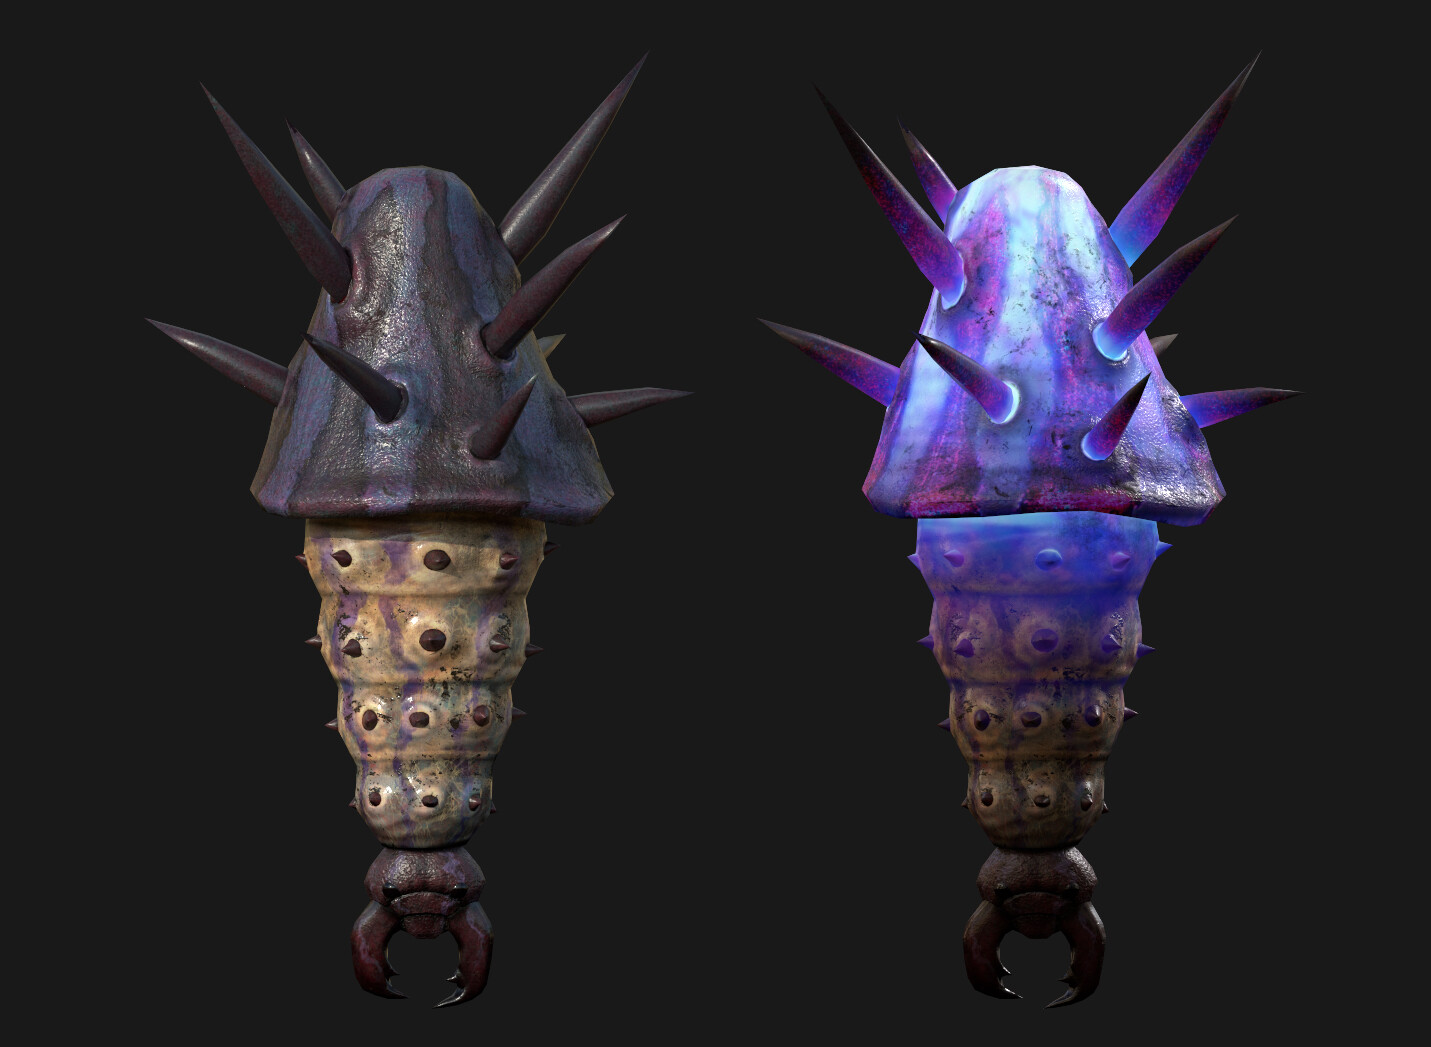 Horklumps low poly and Textures. We wanted it to feel squishy with a range of skin thickness along its sectioned body. 